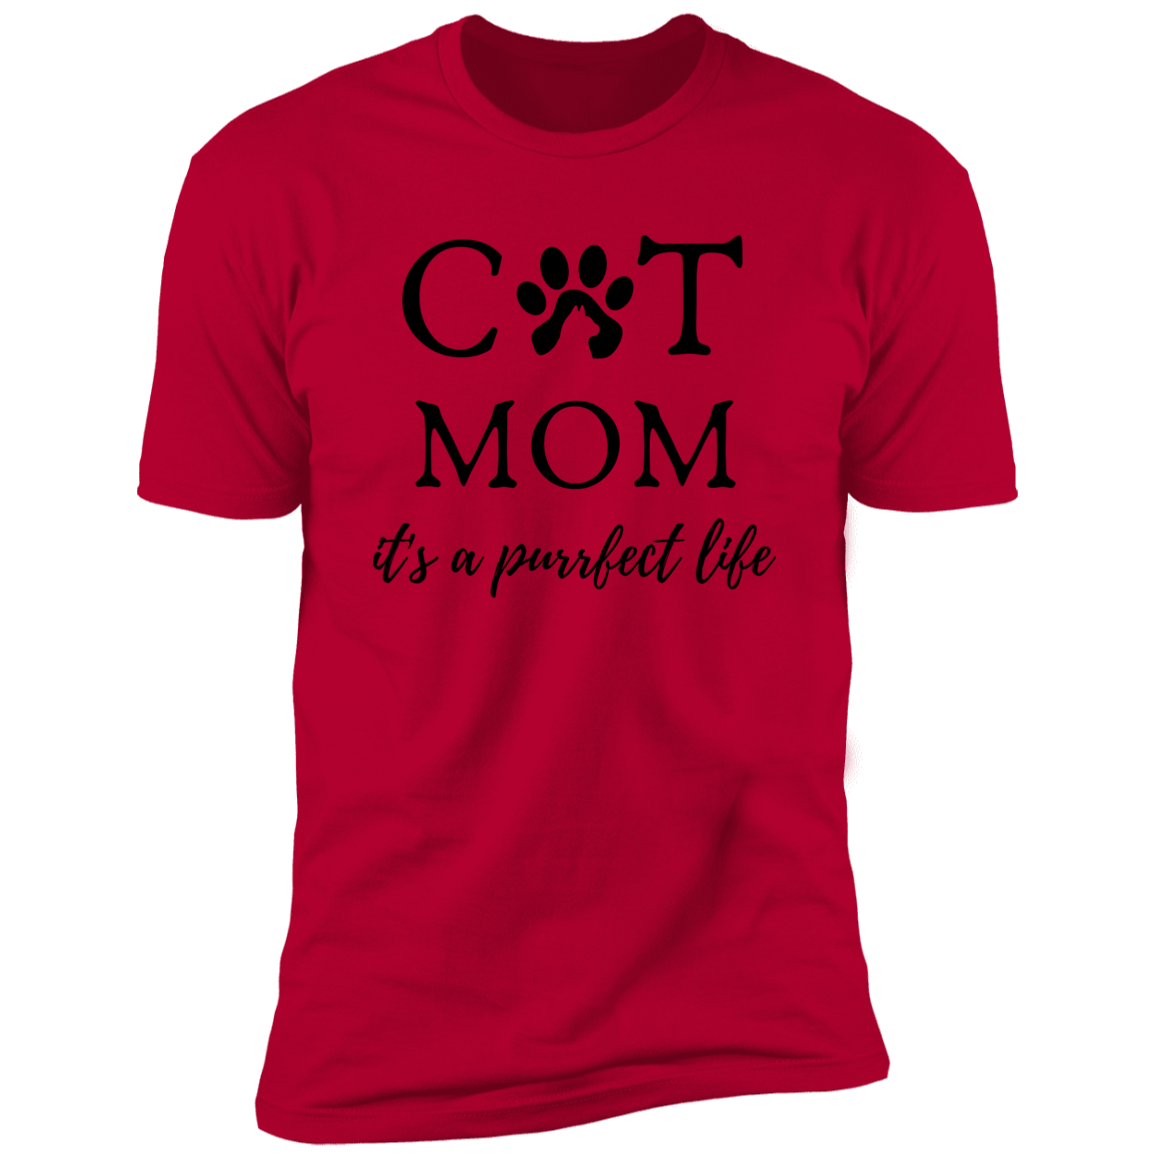 Cat Mom It's a Purrfect Life T-shirt, Cat Mom Shirt for humans, in red